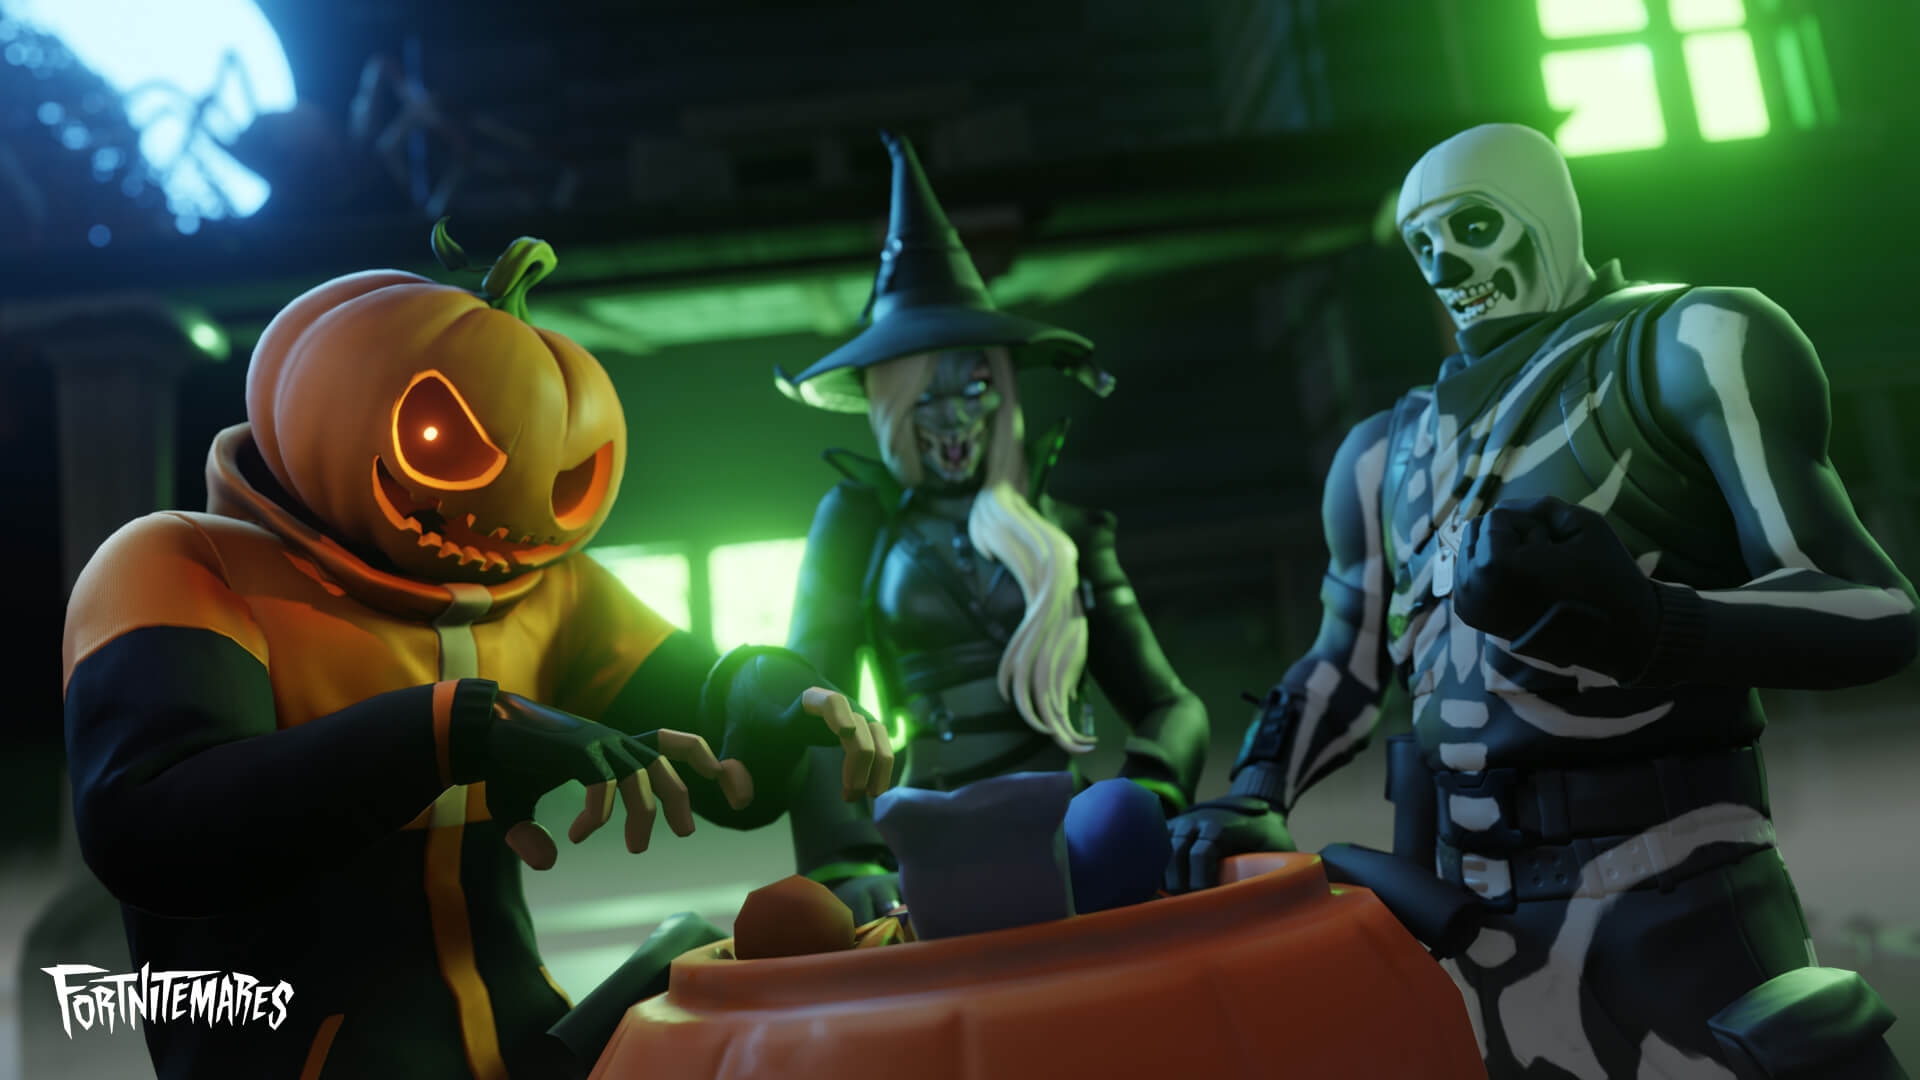 Fortnitemares 2021 Foretells Iconic Creatures, Cubic Chaos, and Screentime Scares